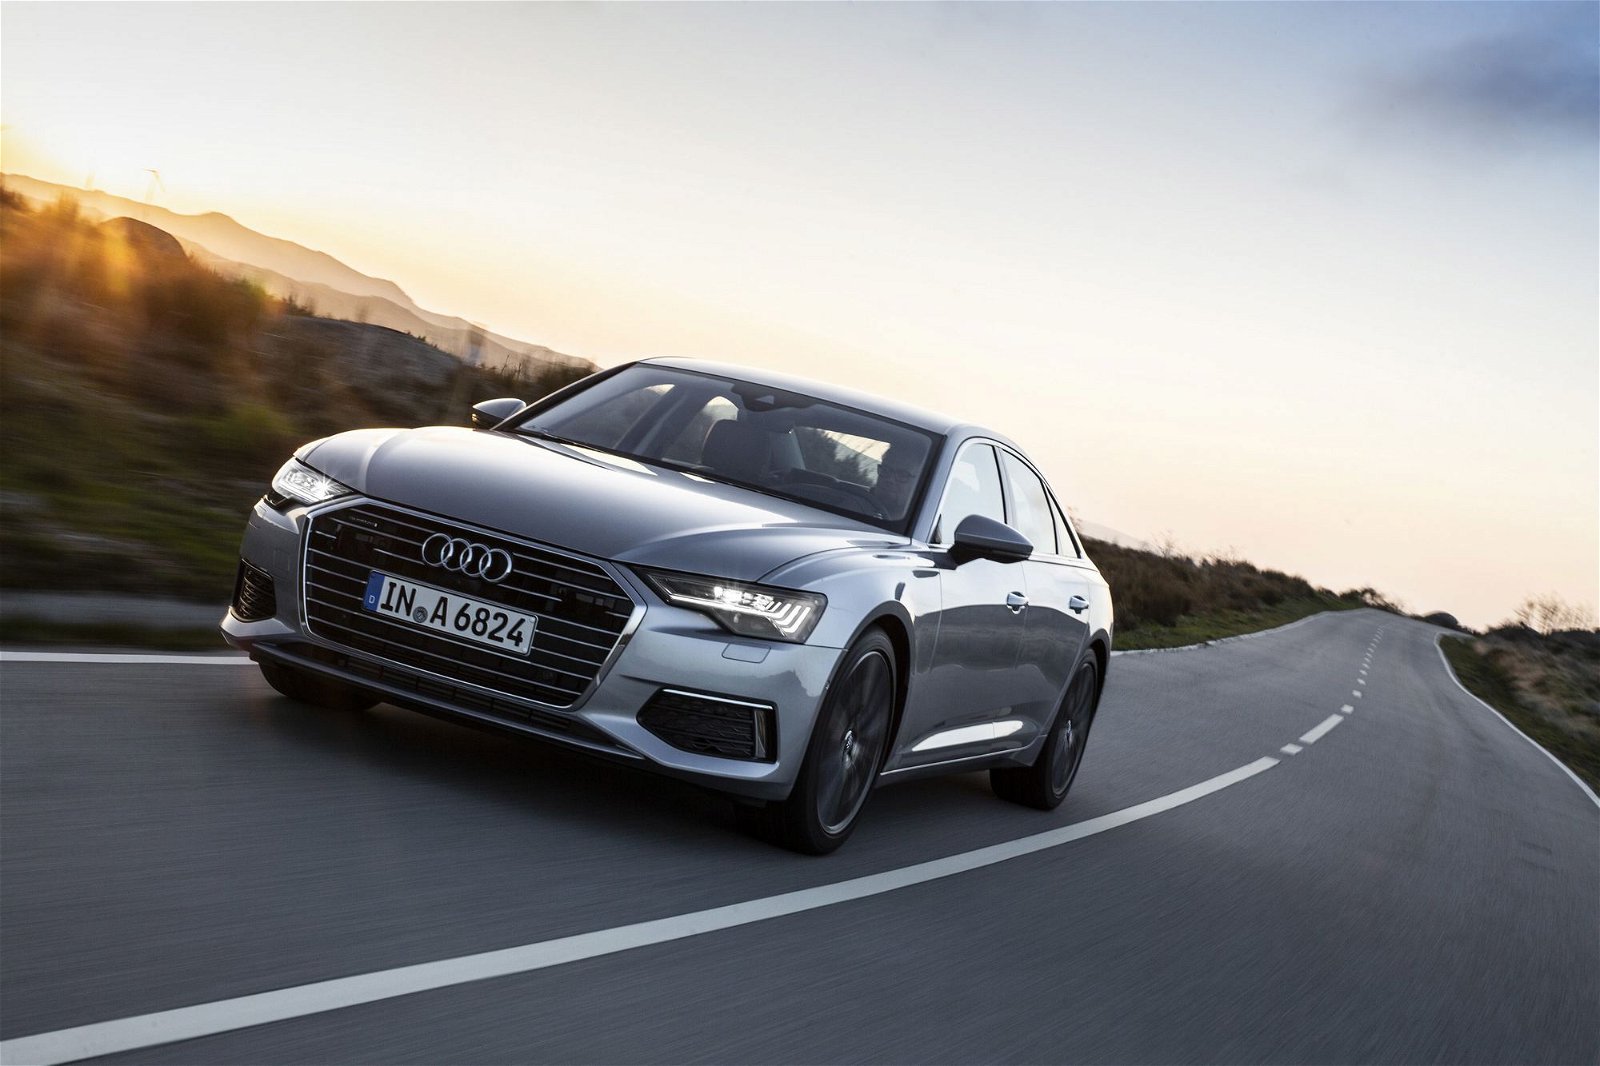 2019 Audi A6 price starts at $58,900, features lots of advanced tech